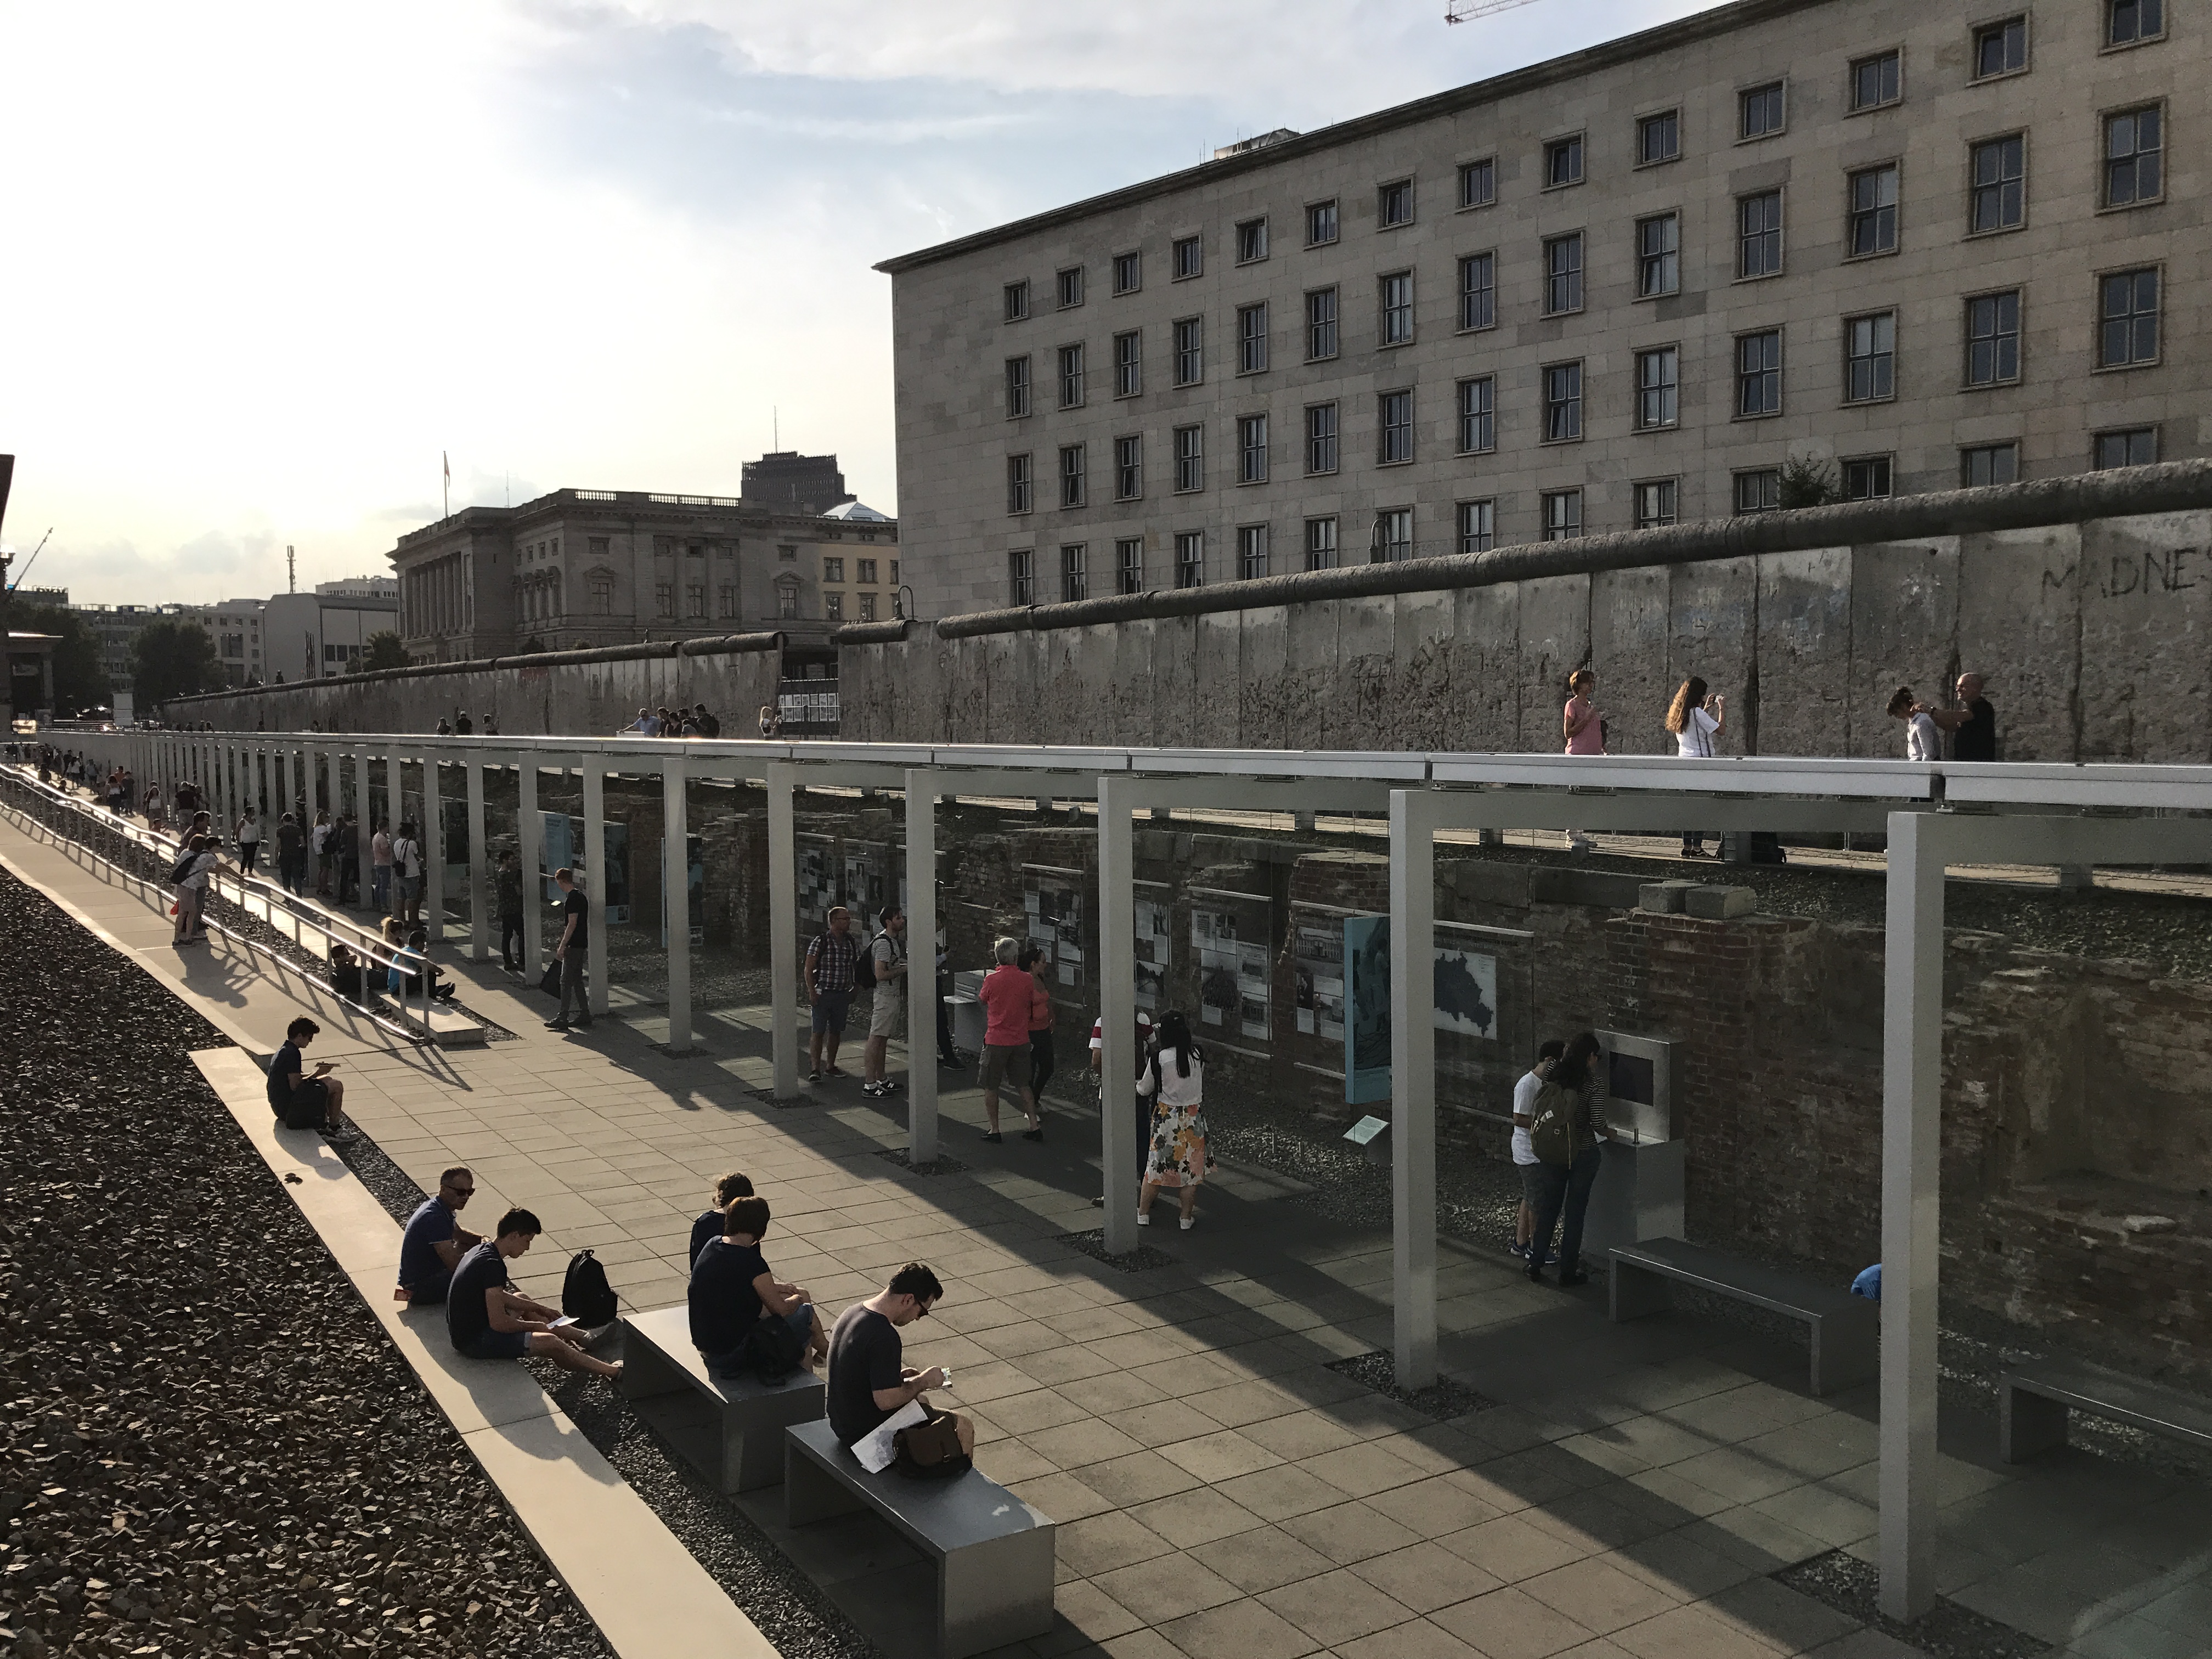 The largest remaining section of the Berlin Wall, sitting between the Topography of Terror and the Bundesministerium der Finanzen.